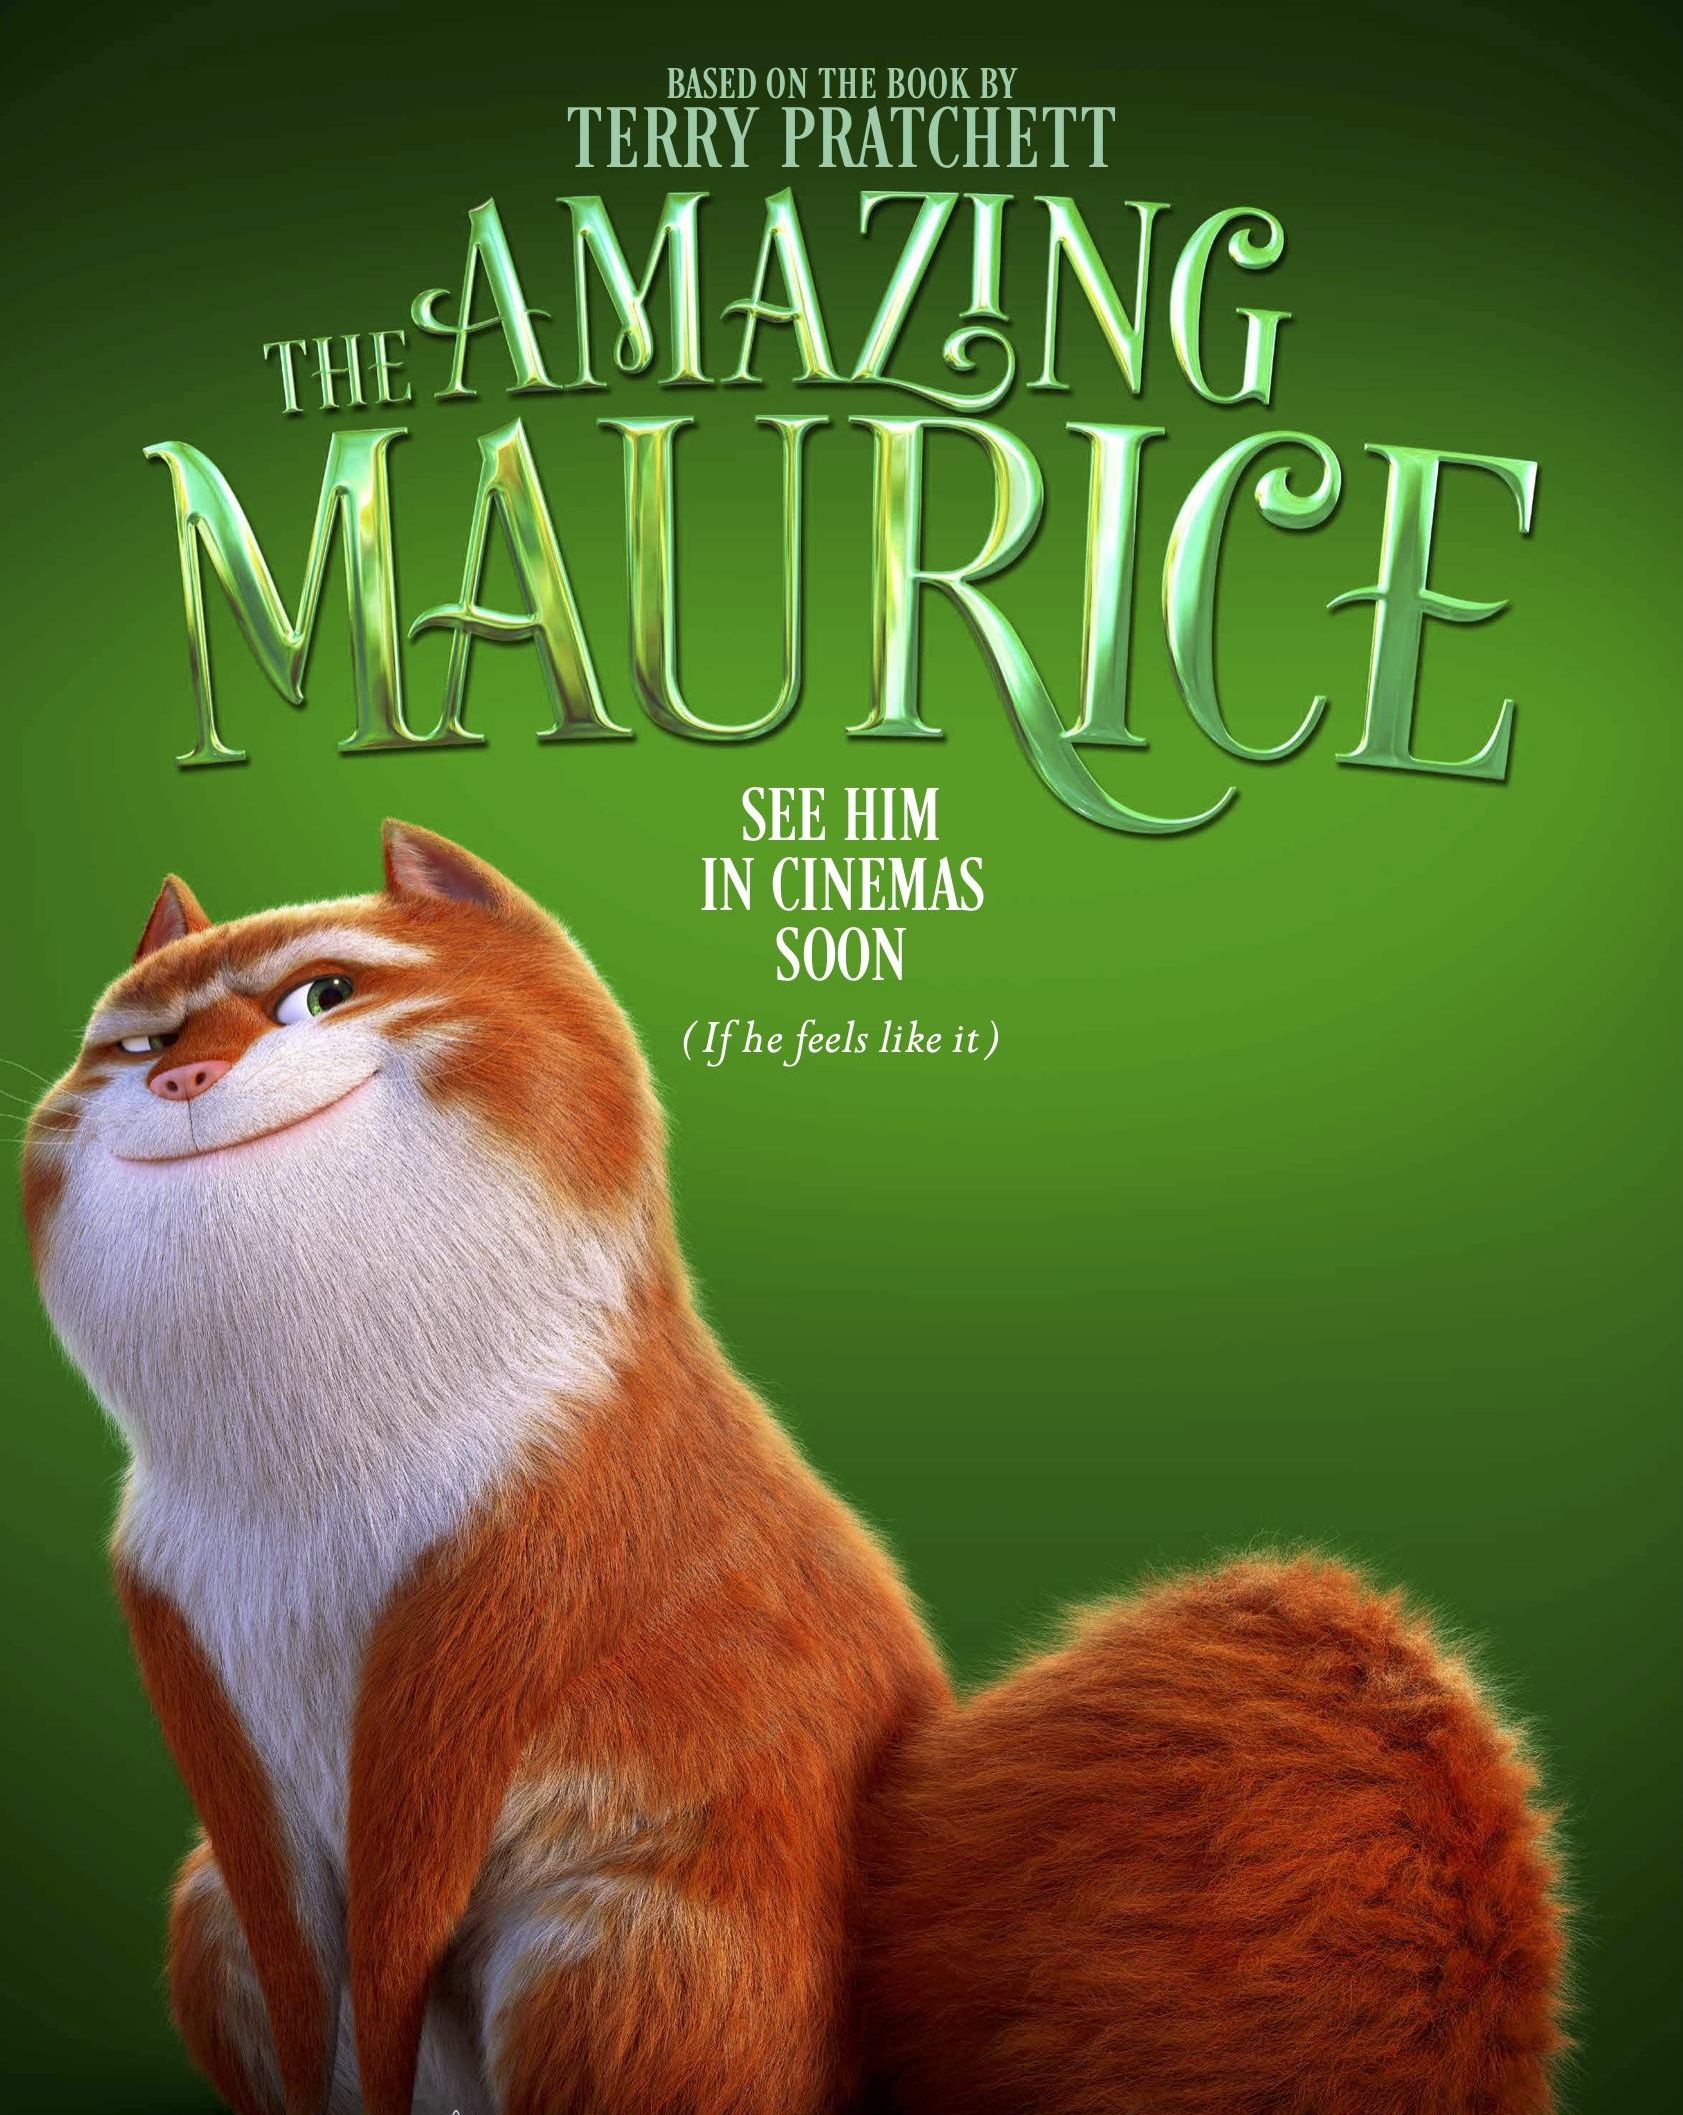 Where to Watch The Amazing Maurice